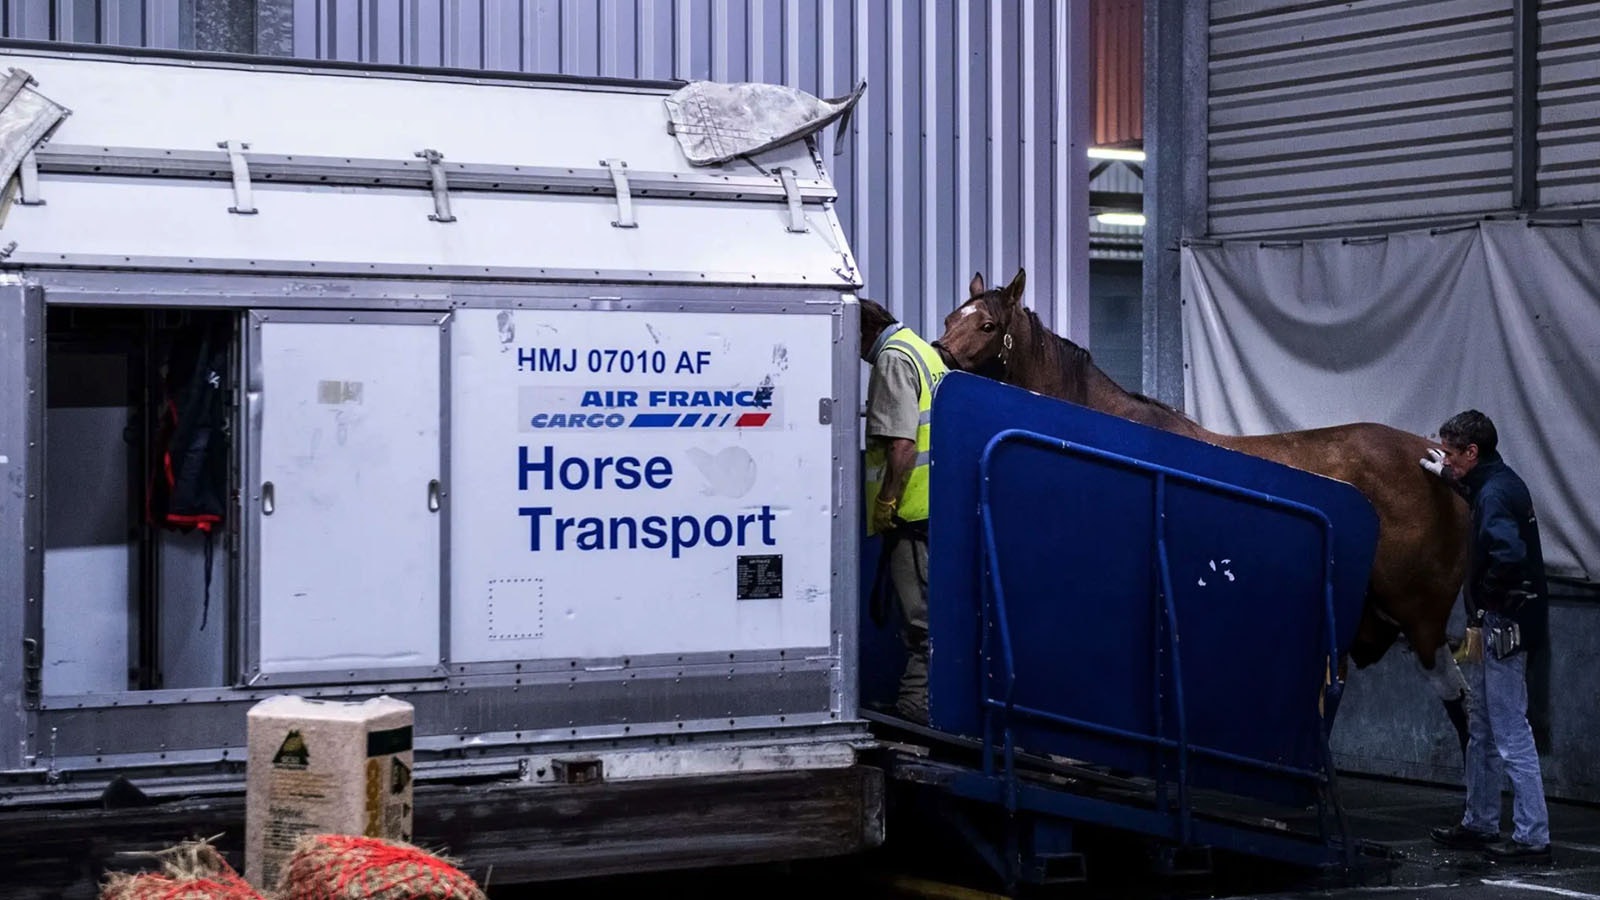 A horse is loaded into an equine transport cargo box in this file photo.